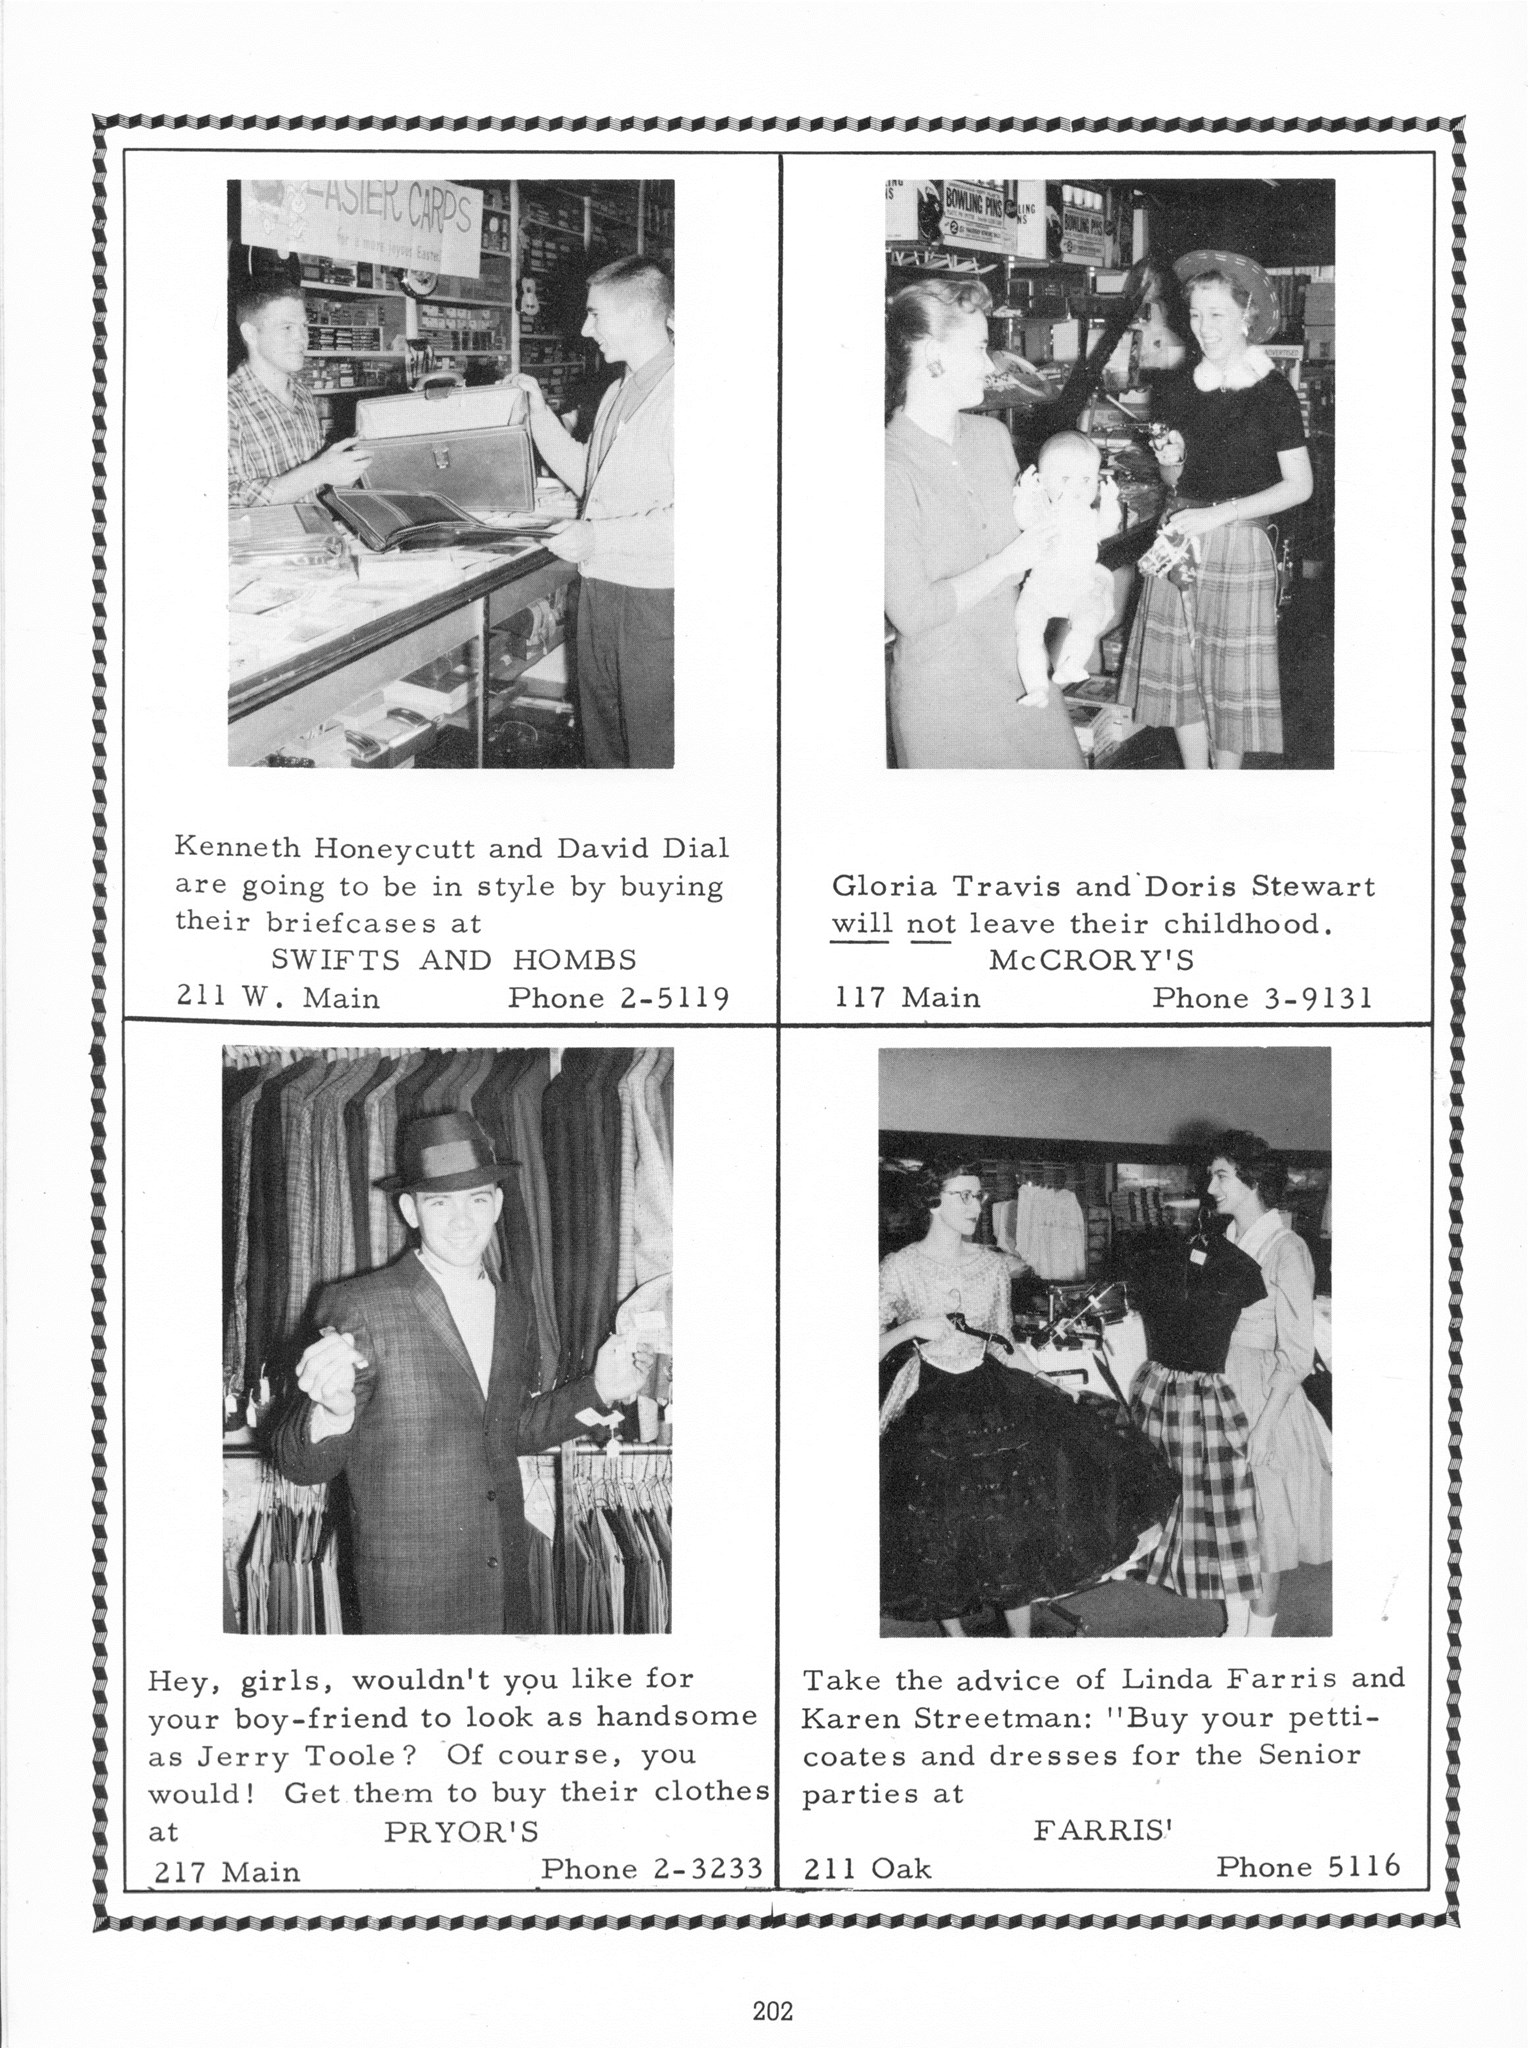 ../../../Images/Large/1960/Arclight-1960-pg0202.jpg